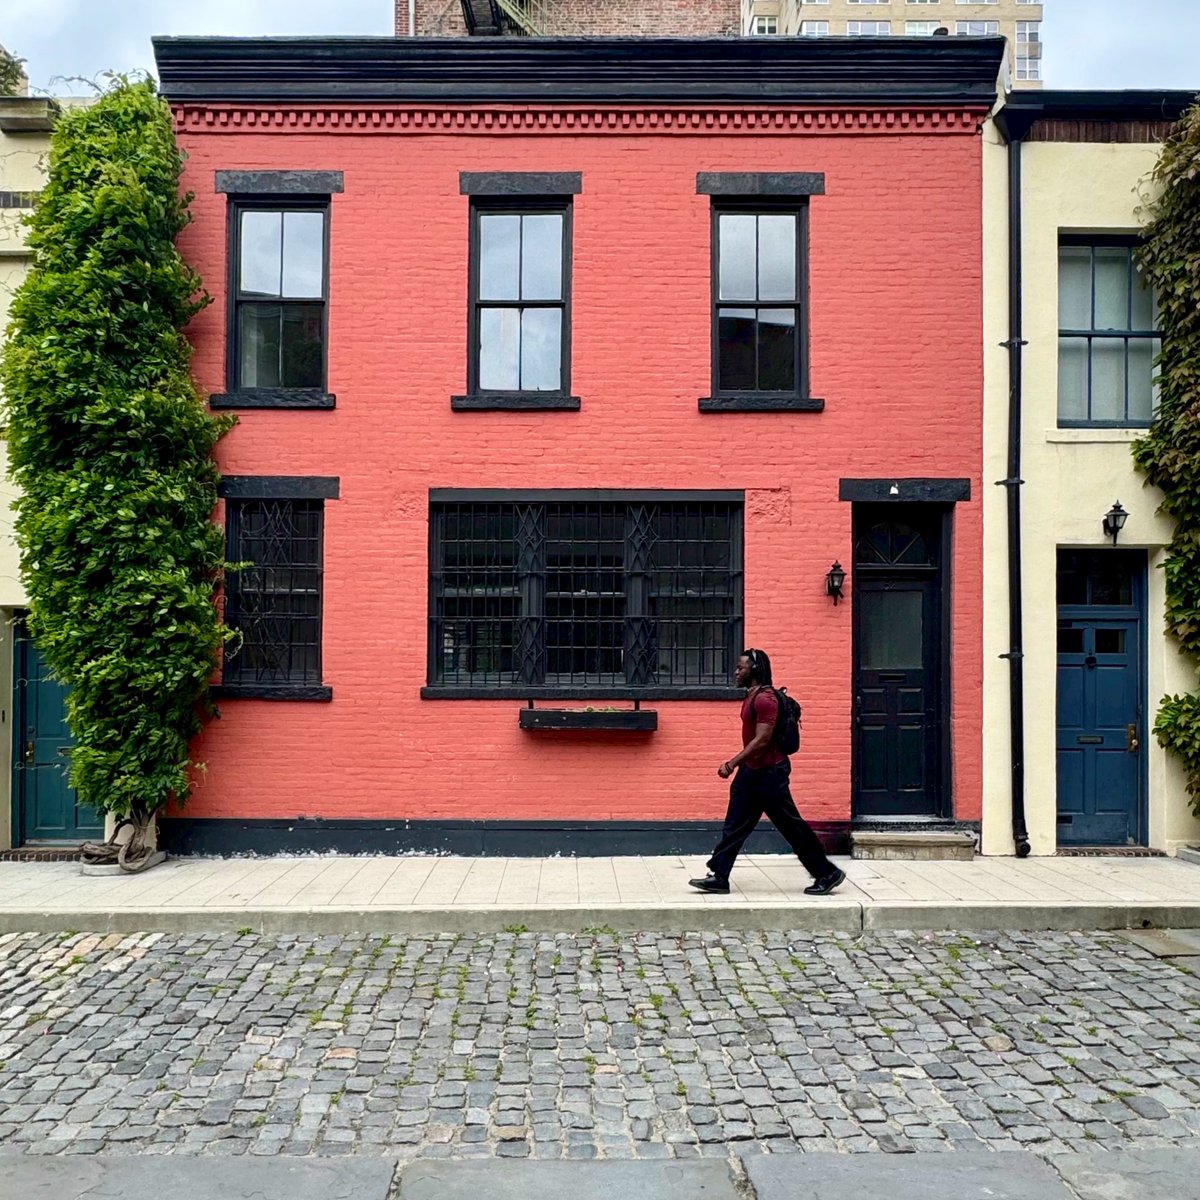 ❤️ Washington Mews
Street of 2 stories buildings
that use to be horse stables in the 1800’s than art studios and finally sold to NYU 
#greenwichvillage #NYU
#nyc #photography #ny1pic